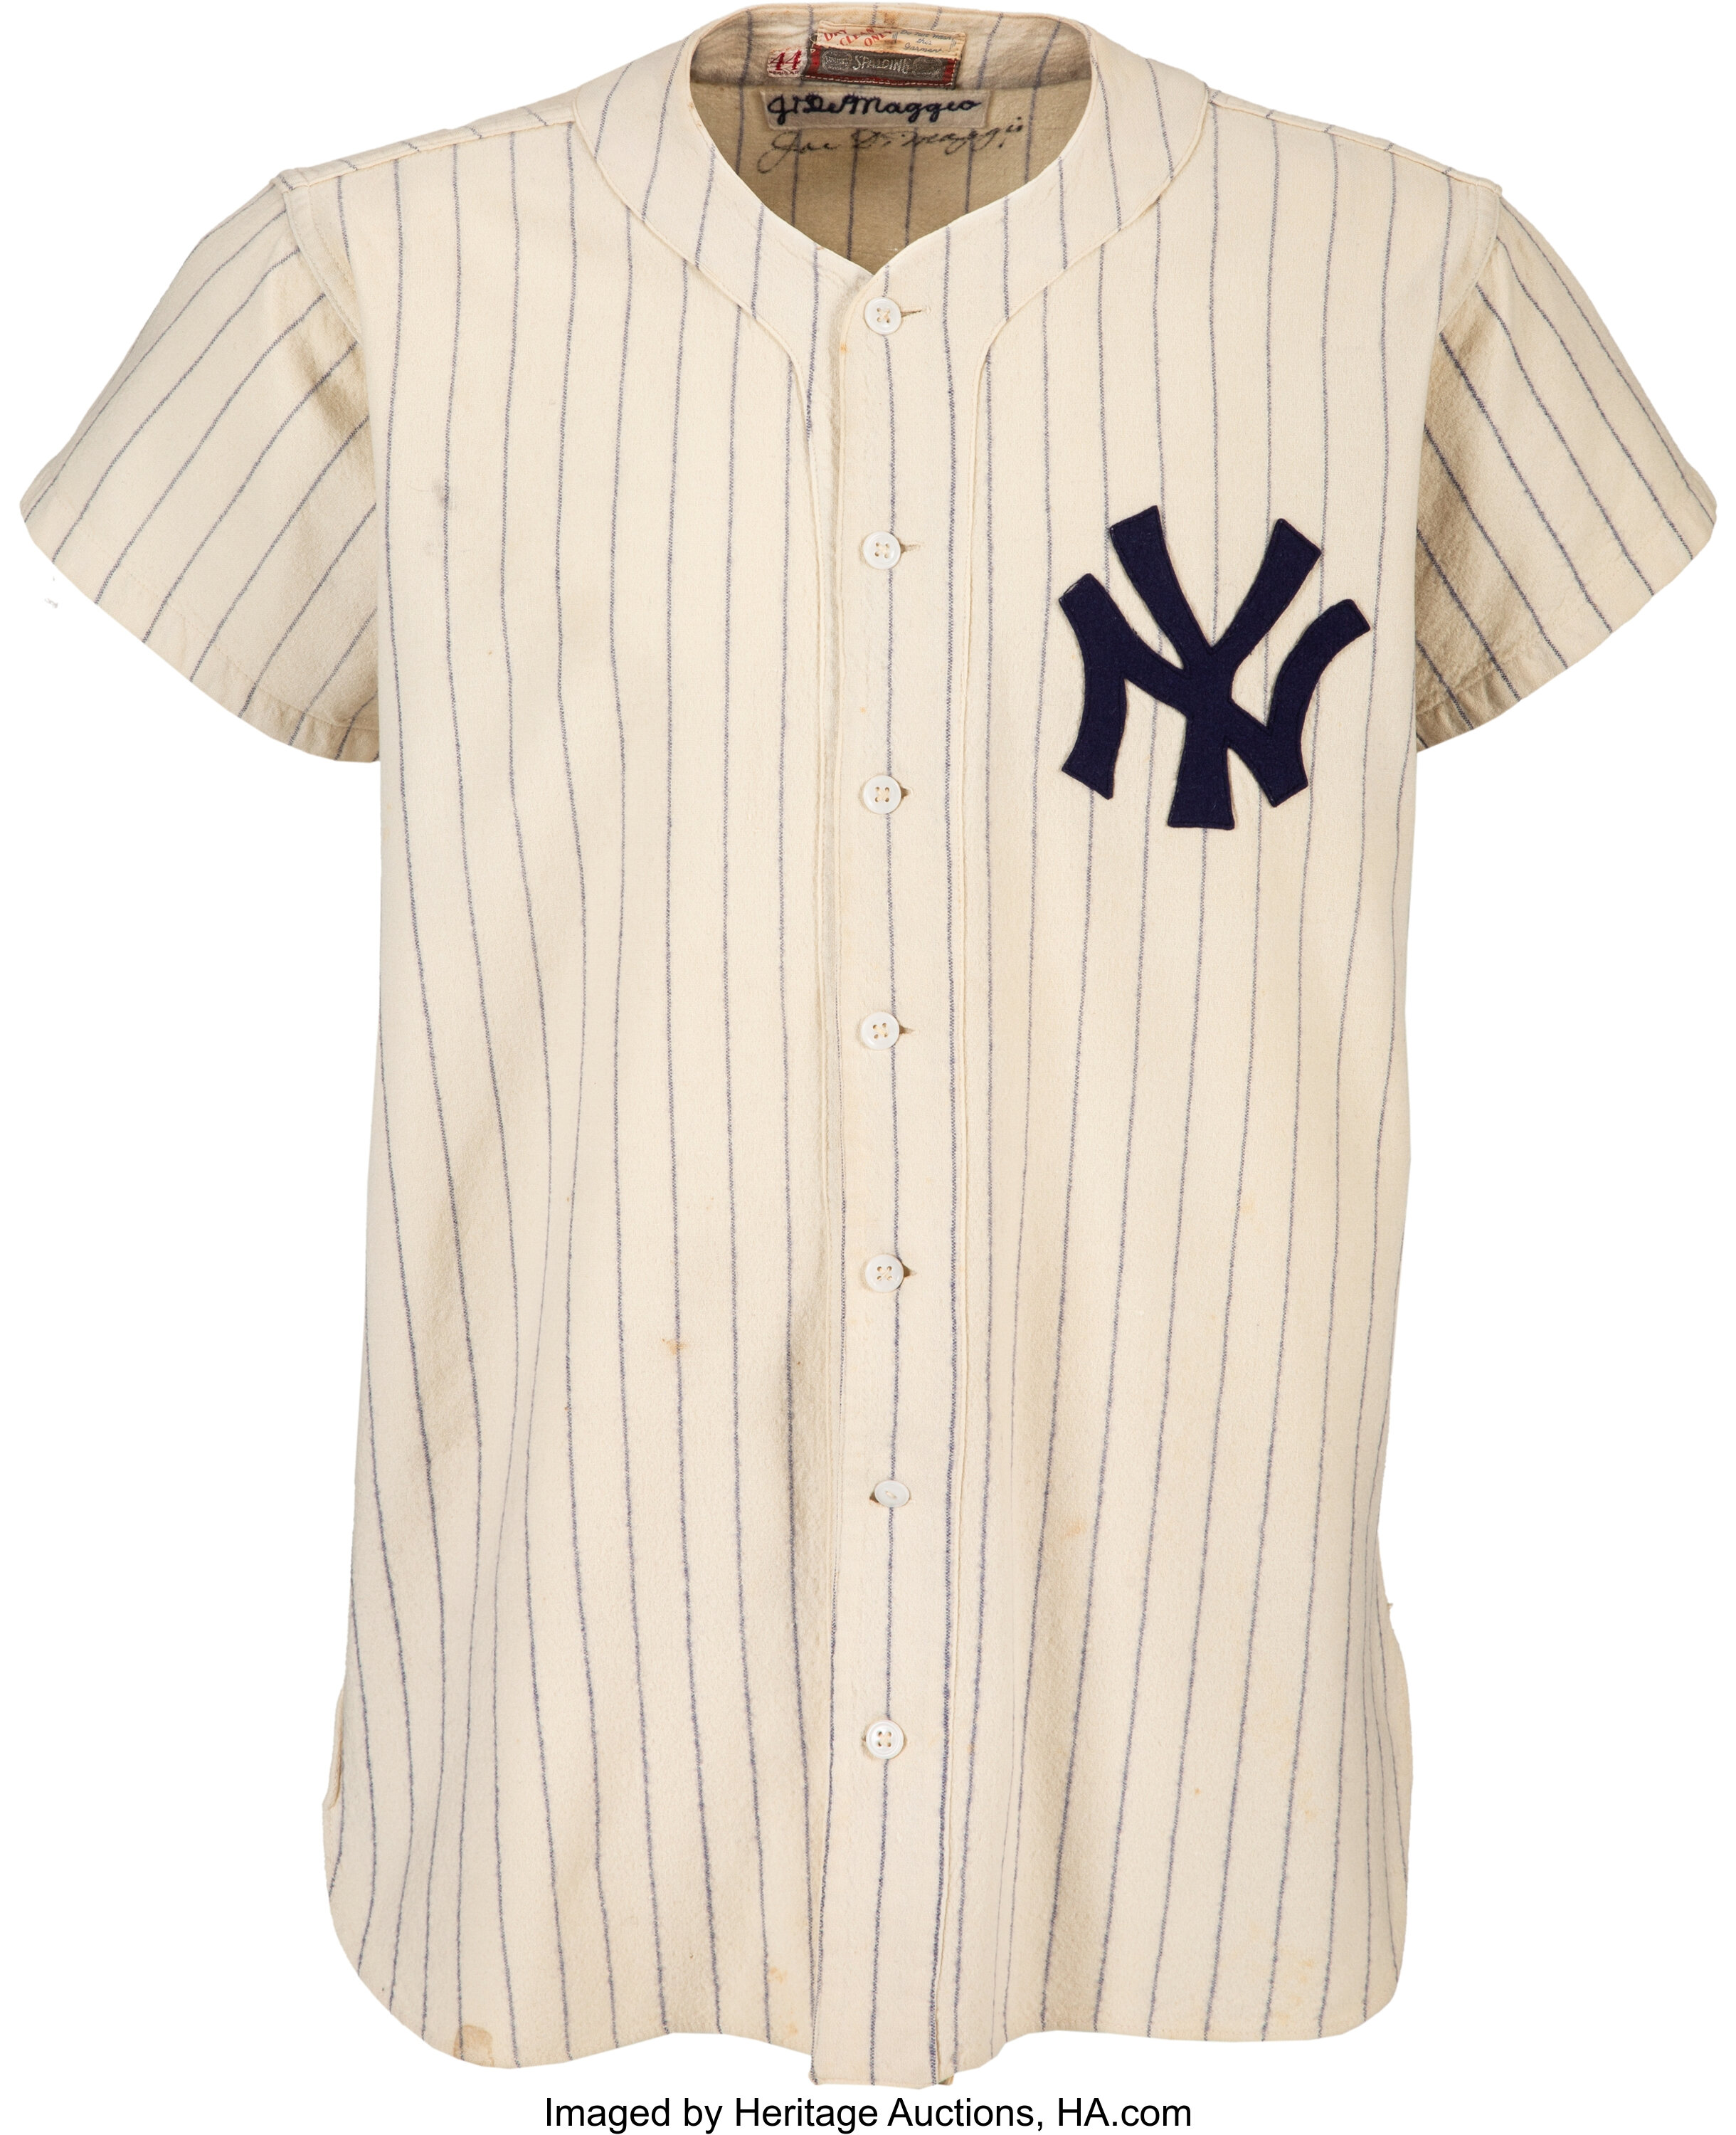 1951 AUTHENTIC JOE DIMAGGIO VINTAGE NY YANKEES JERSEY MITCHELL AND NESS 48  XL